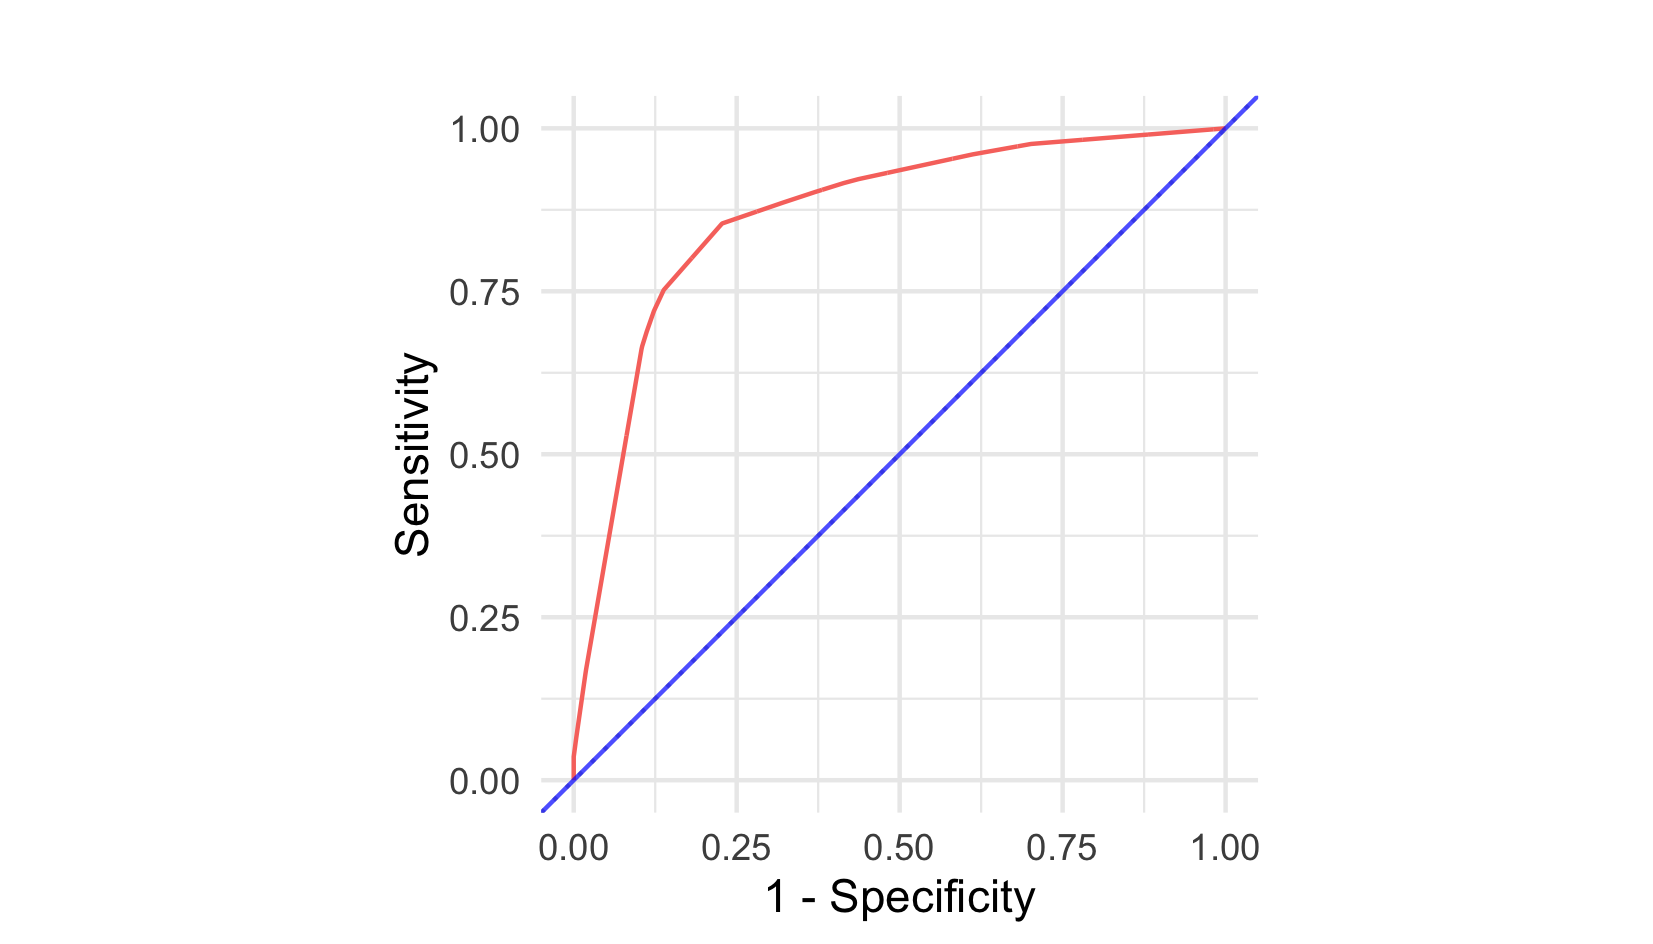 Image shows graph with '1 - Specificity' on the x-axis from 0 to 1 and 'Sensitivity' on the y-axis from 0 to 1. There is a blue line from the bottom left (0,0) to the top right (1,1) of the graph and a red line that forms a curve from (0,0) to around (0.2,0.8) then (1,1).